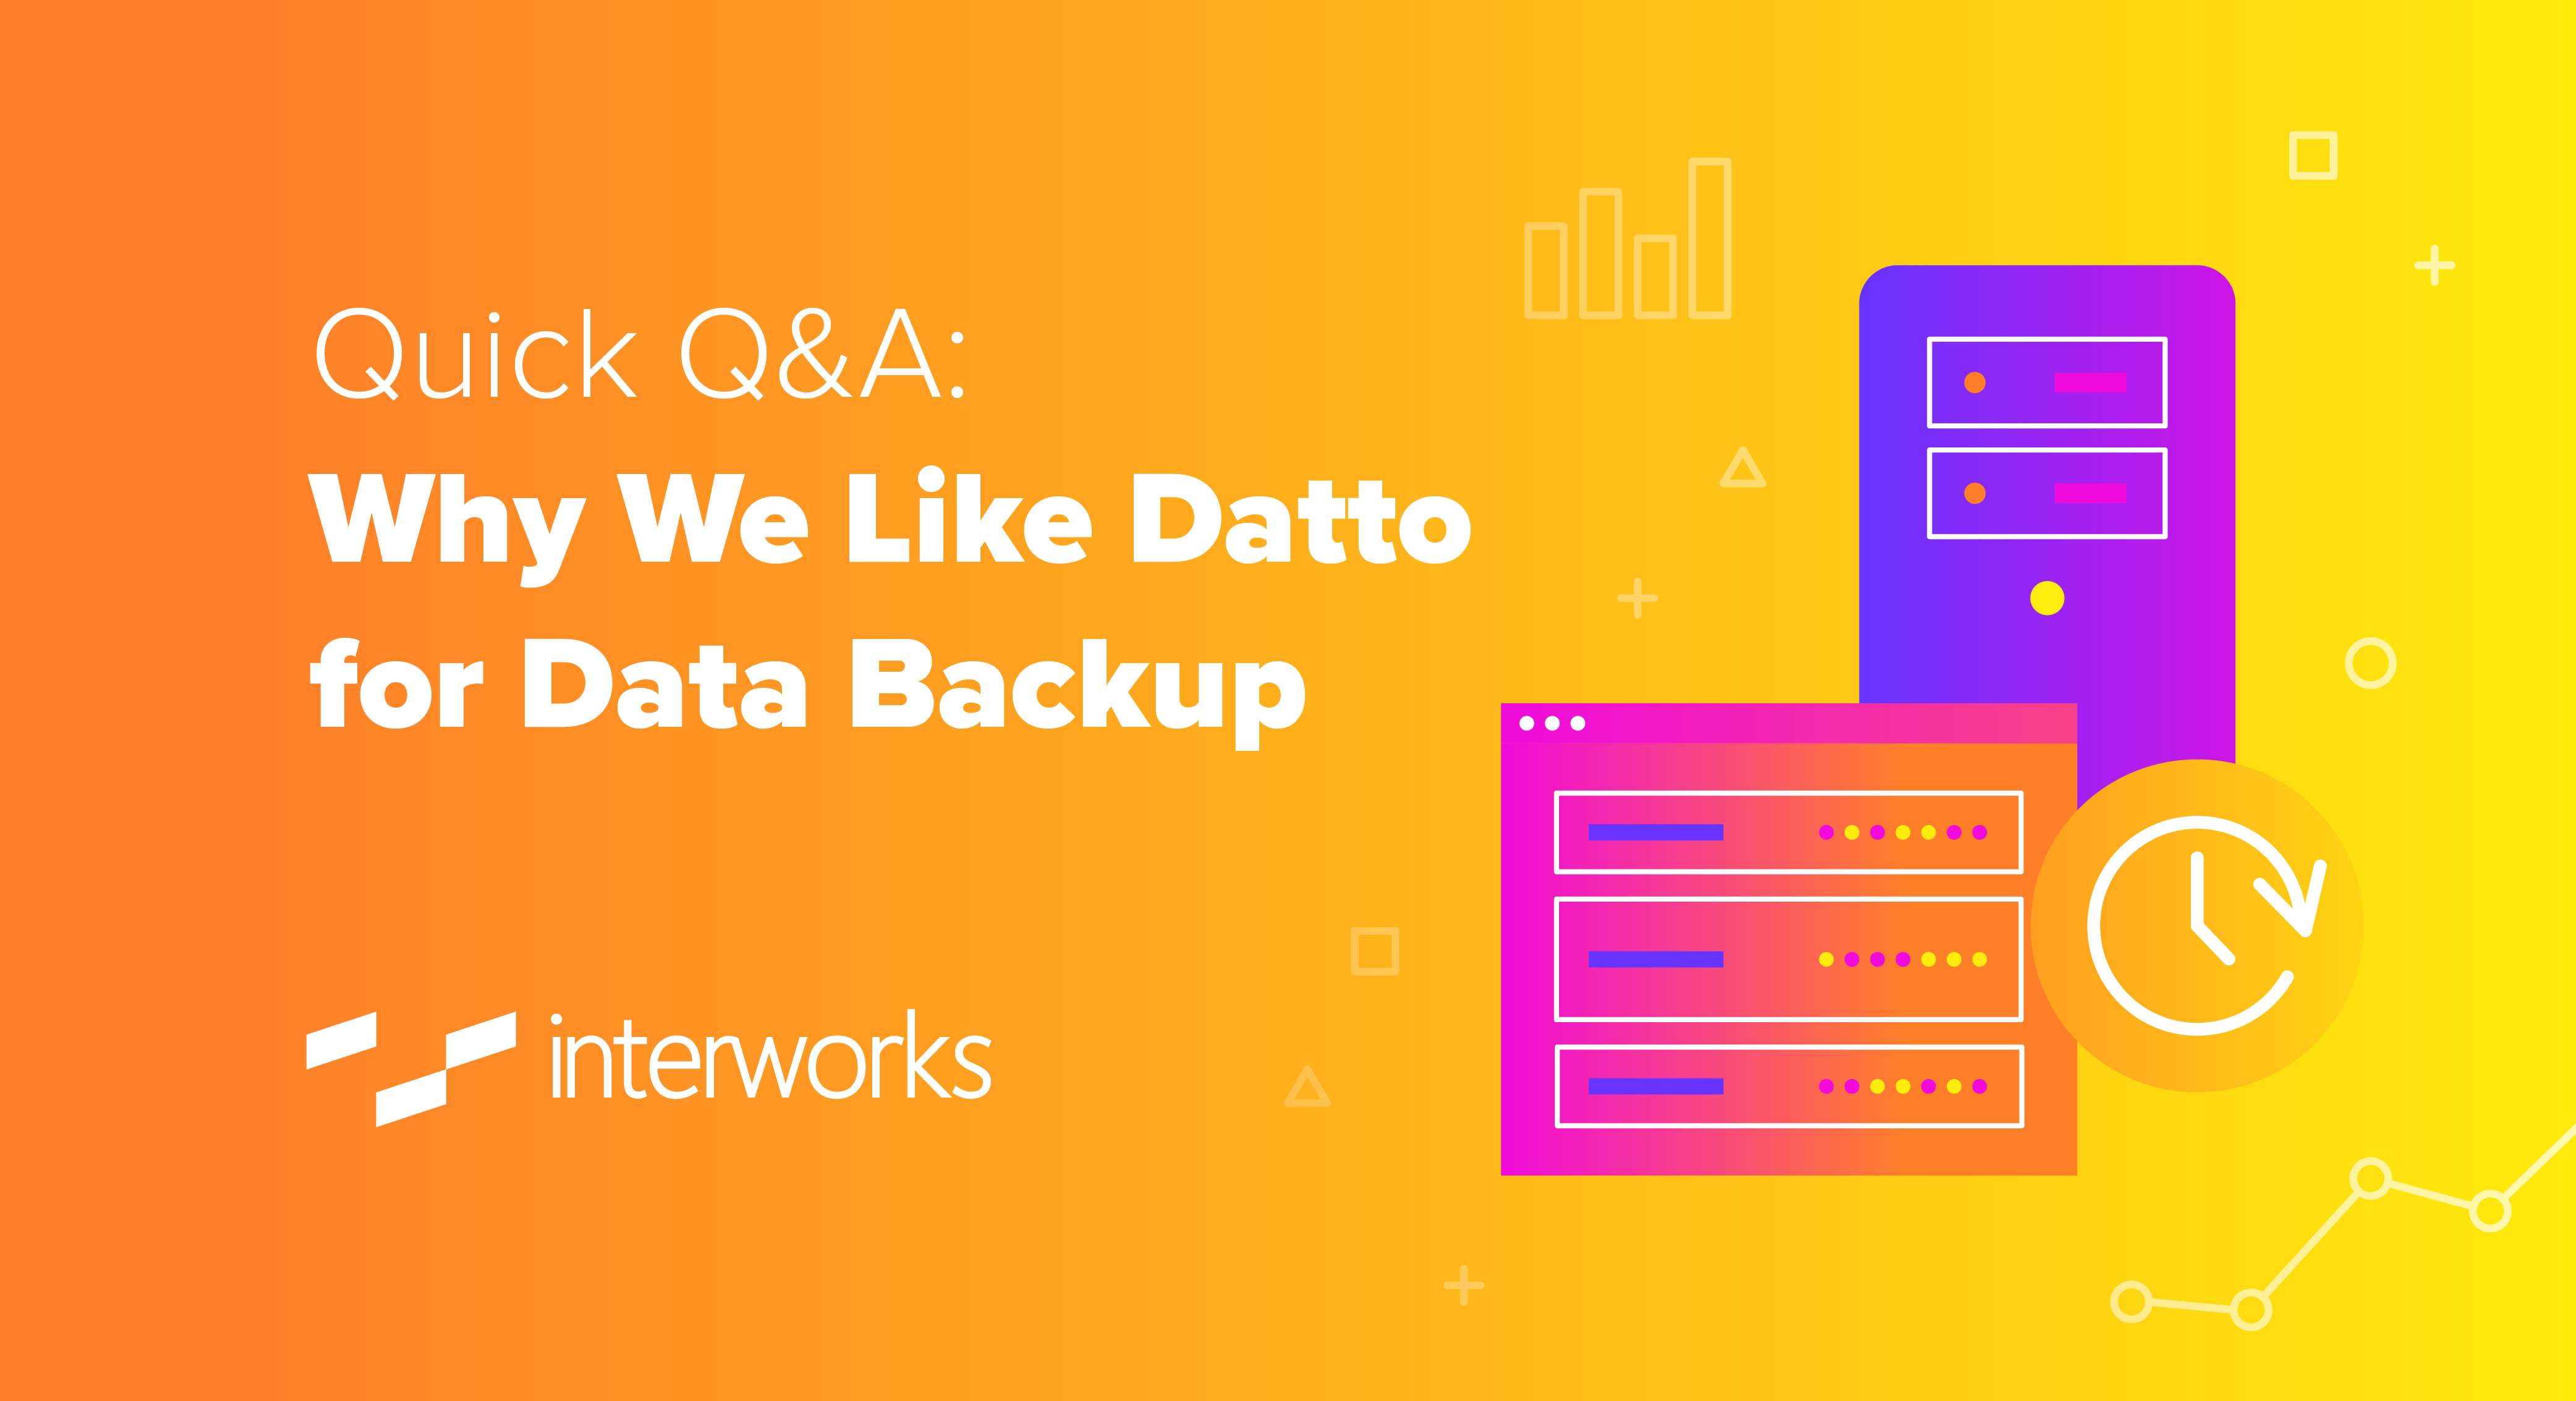 Quick Q&A: Why We Like Datto for Data Backup - InterWorks